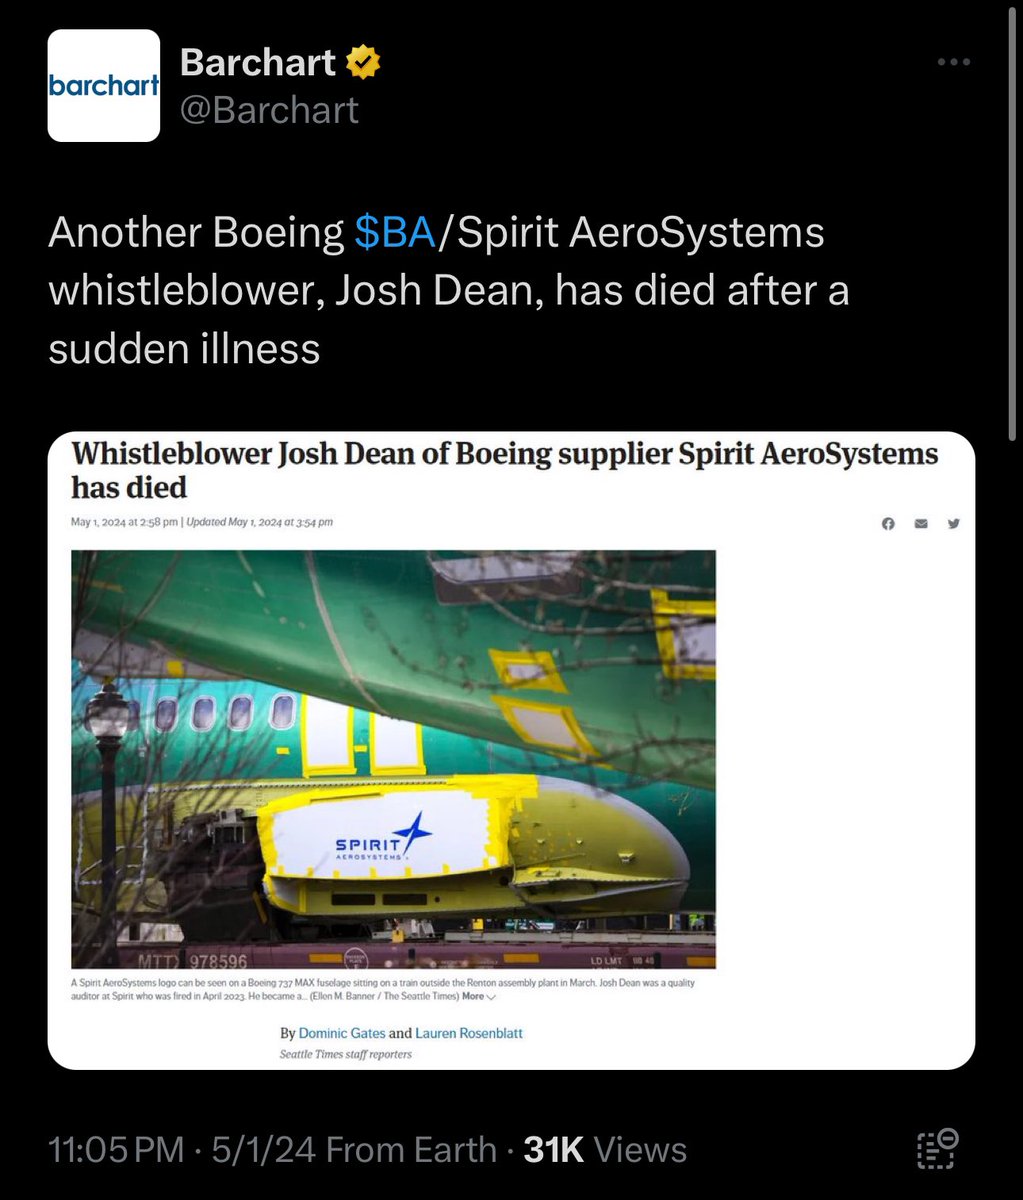 I stand corrected it’s gonna take a lot of whistleblower deaths 🐝4 someone really does something about #Boeing $ba wtf going on over there @Barchart 😐